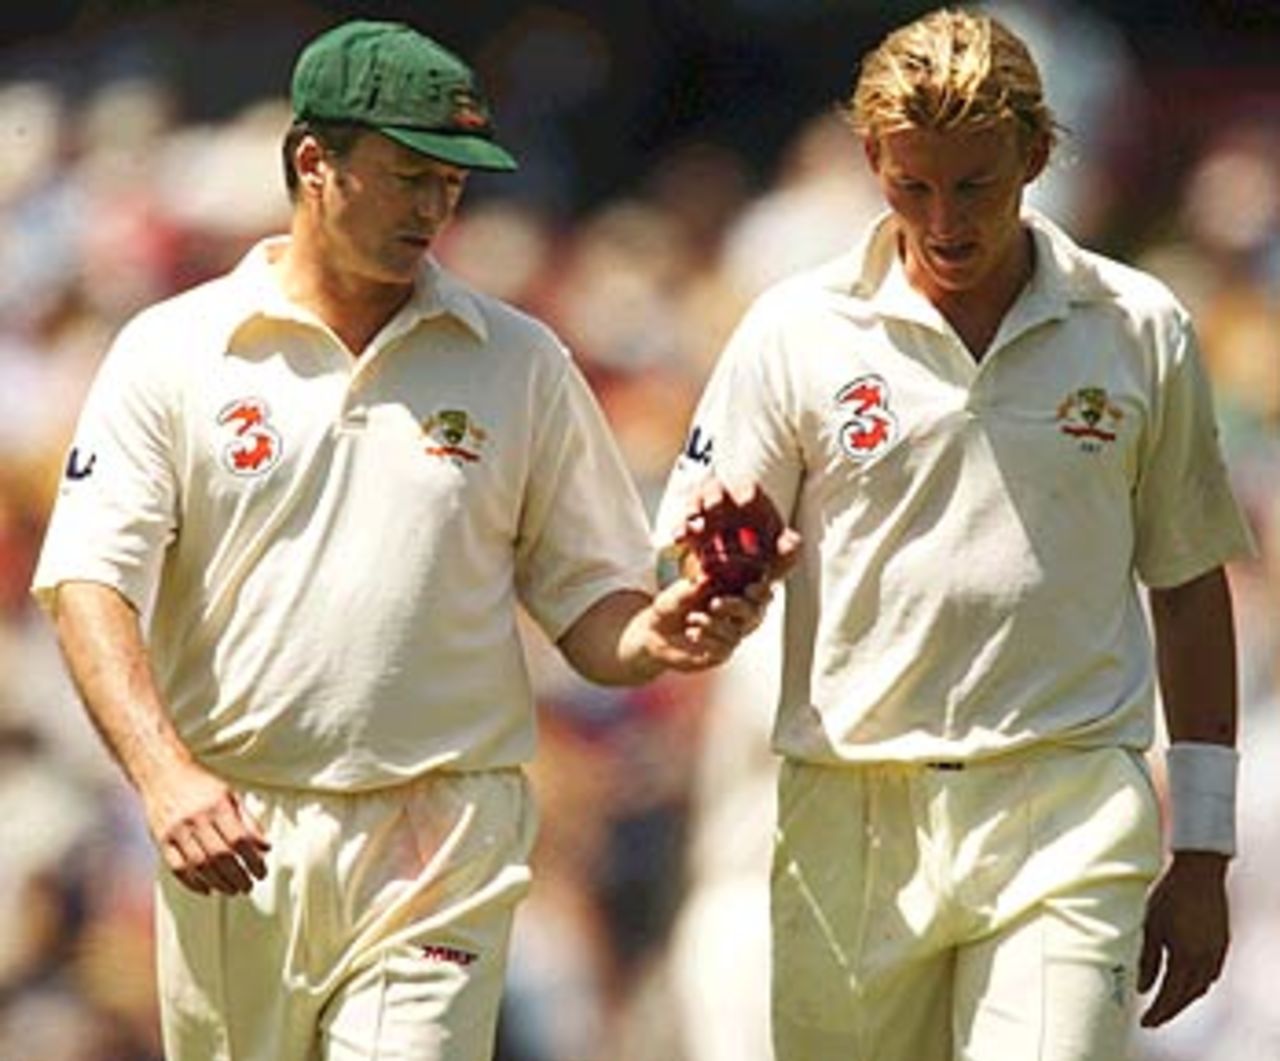 Steve Waugh, who made his Test debut here exactly 18 years ago, gives Brett Lee some fatherly advice, Australia v India, 3rd Test, Melbourne, 1st day, December 26, 2003